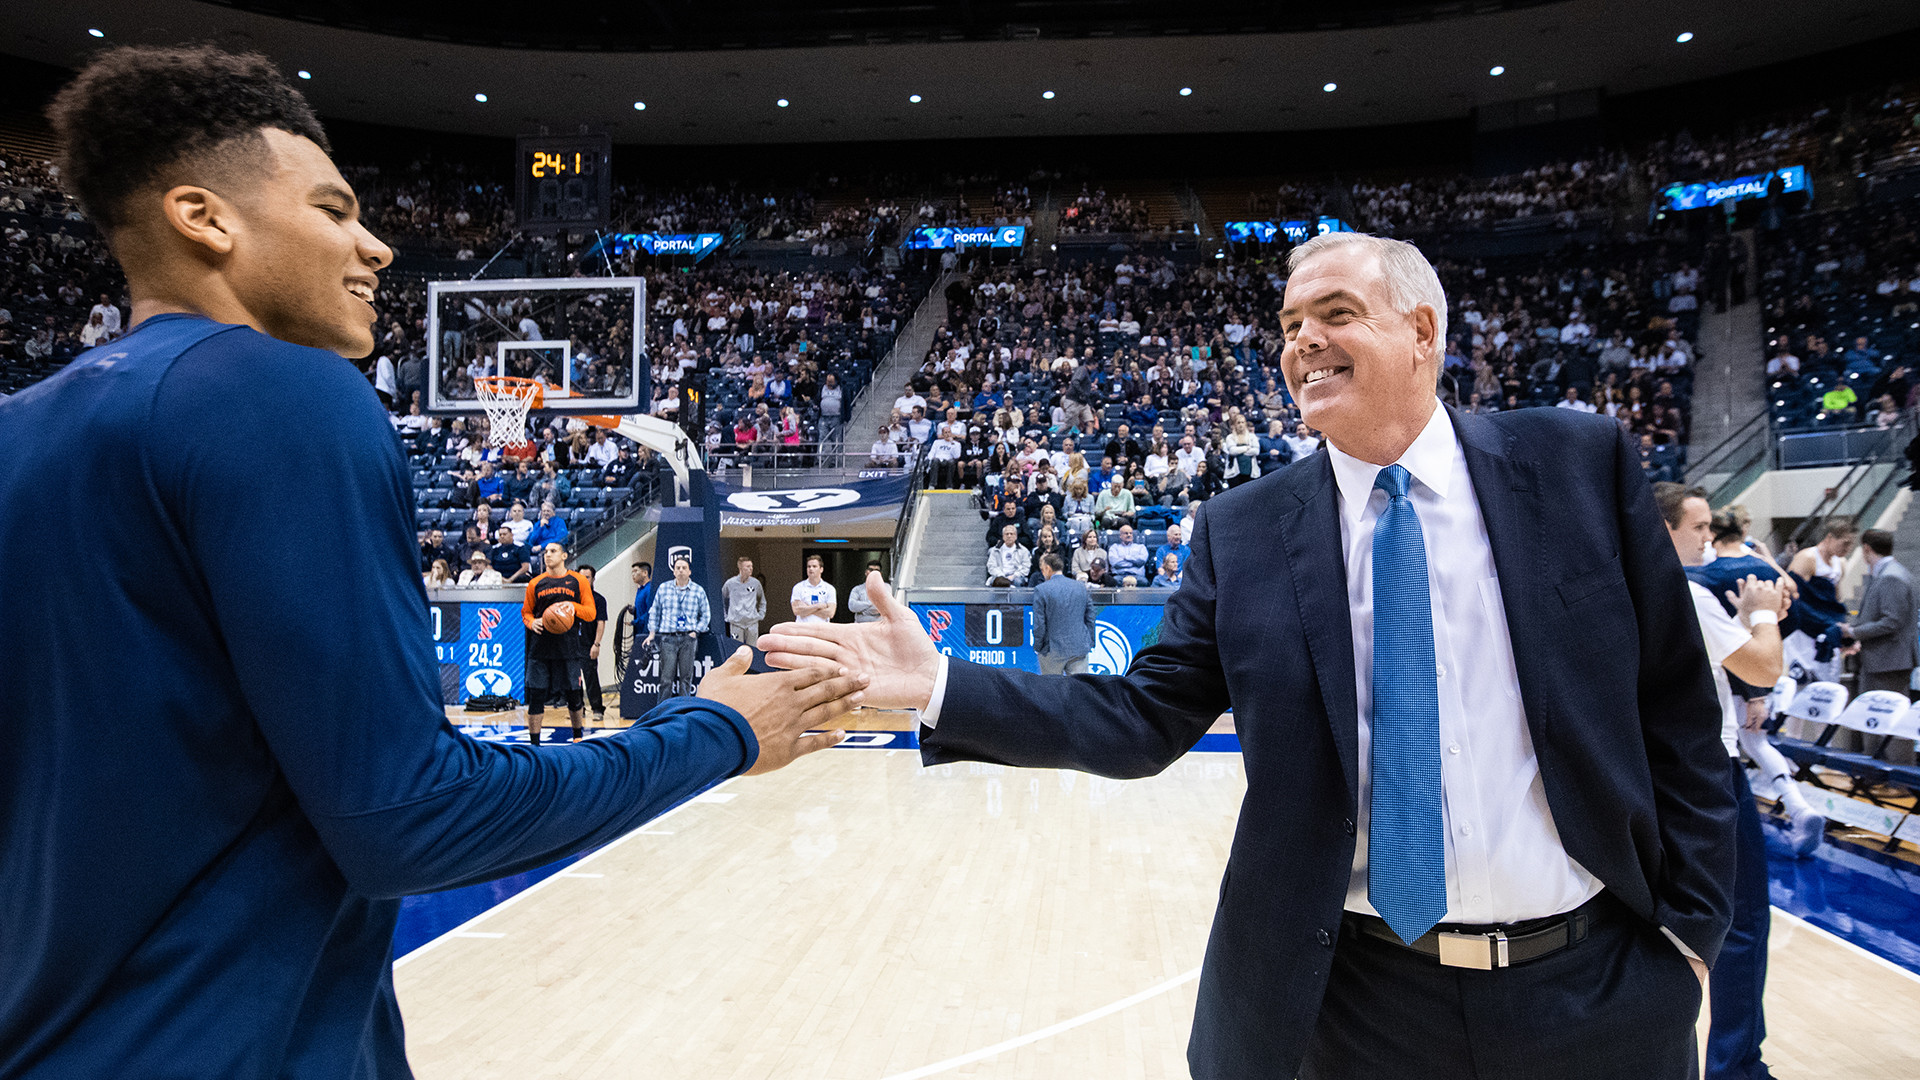 Dave Rose to be Inducted into Utah Sports Hall of Fame, Announced by BYU Athletics